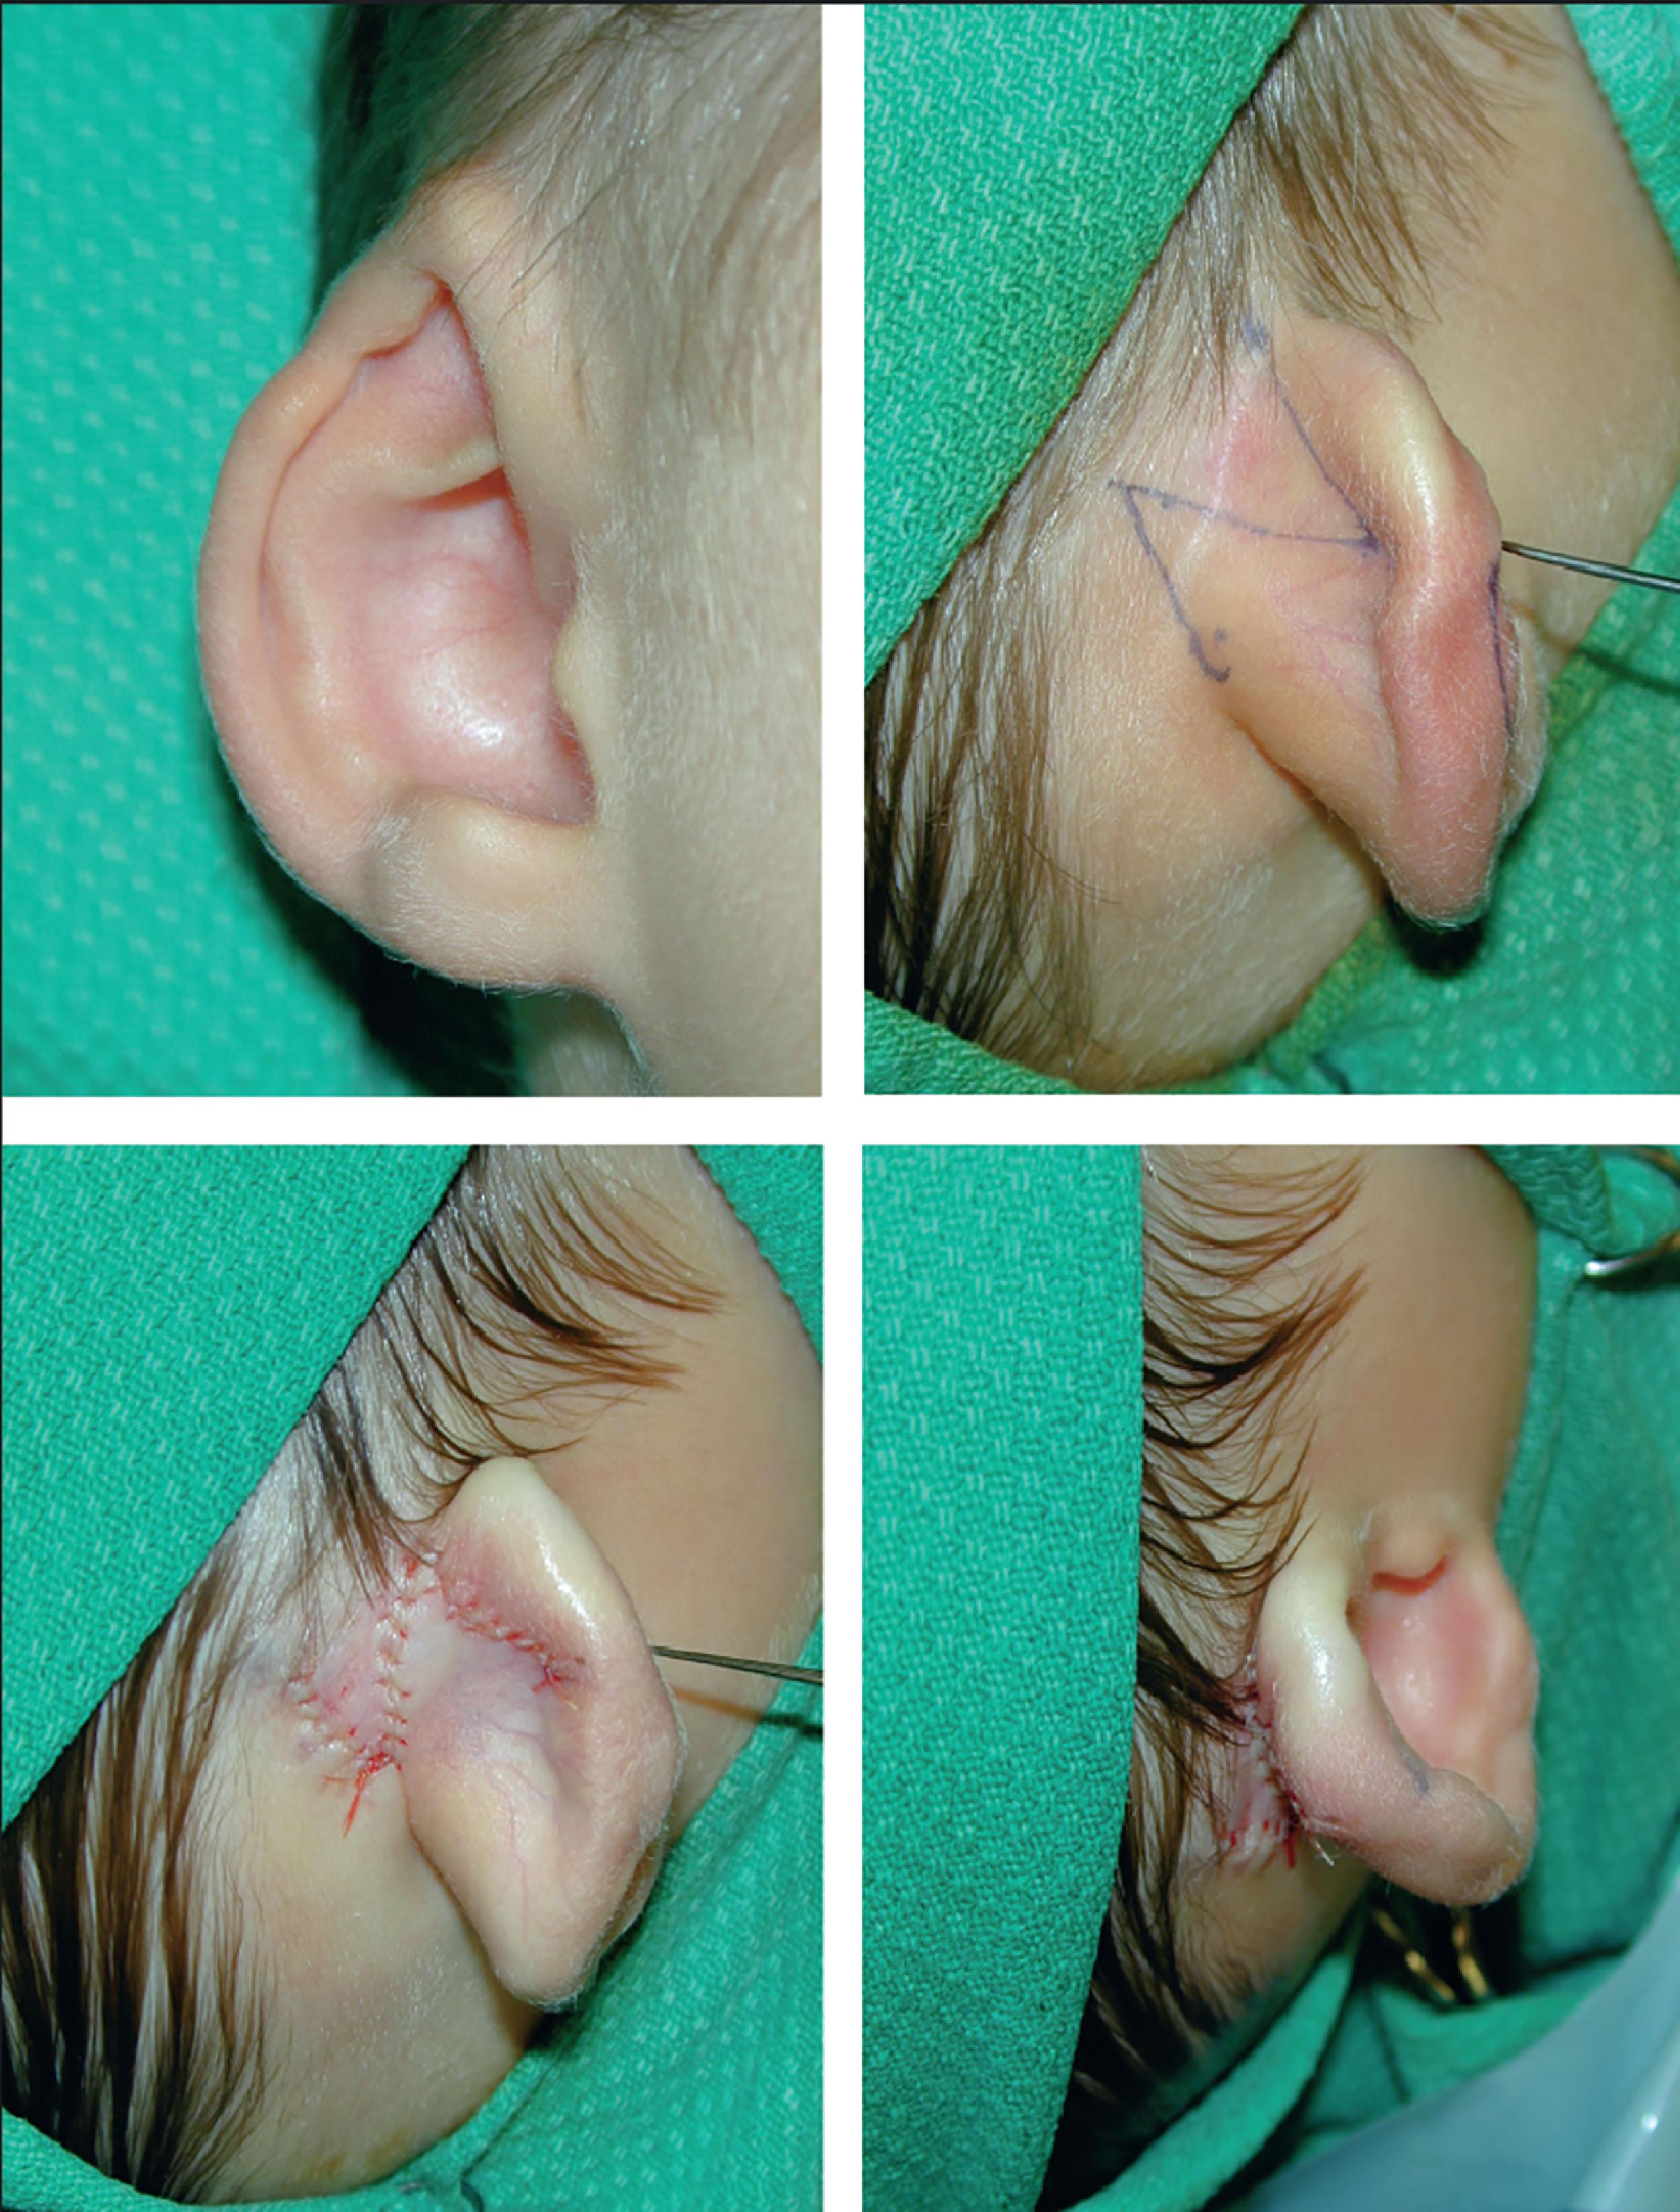 Figure 4.8, Illustration of cryptotia correction where the superior third cartilage is elevated using a Z-plasty to reconstitute the auriculocephalic fold. (Top left) Right ear cryptotia; (top right) Z-plasty markings within the planned fold; (bottom left) after transposition of the Z-plasty skin flaps; and (bottom right) presence of superior third projection and auriculocephalic fold after Z-plasty flap transposition.